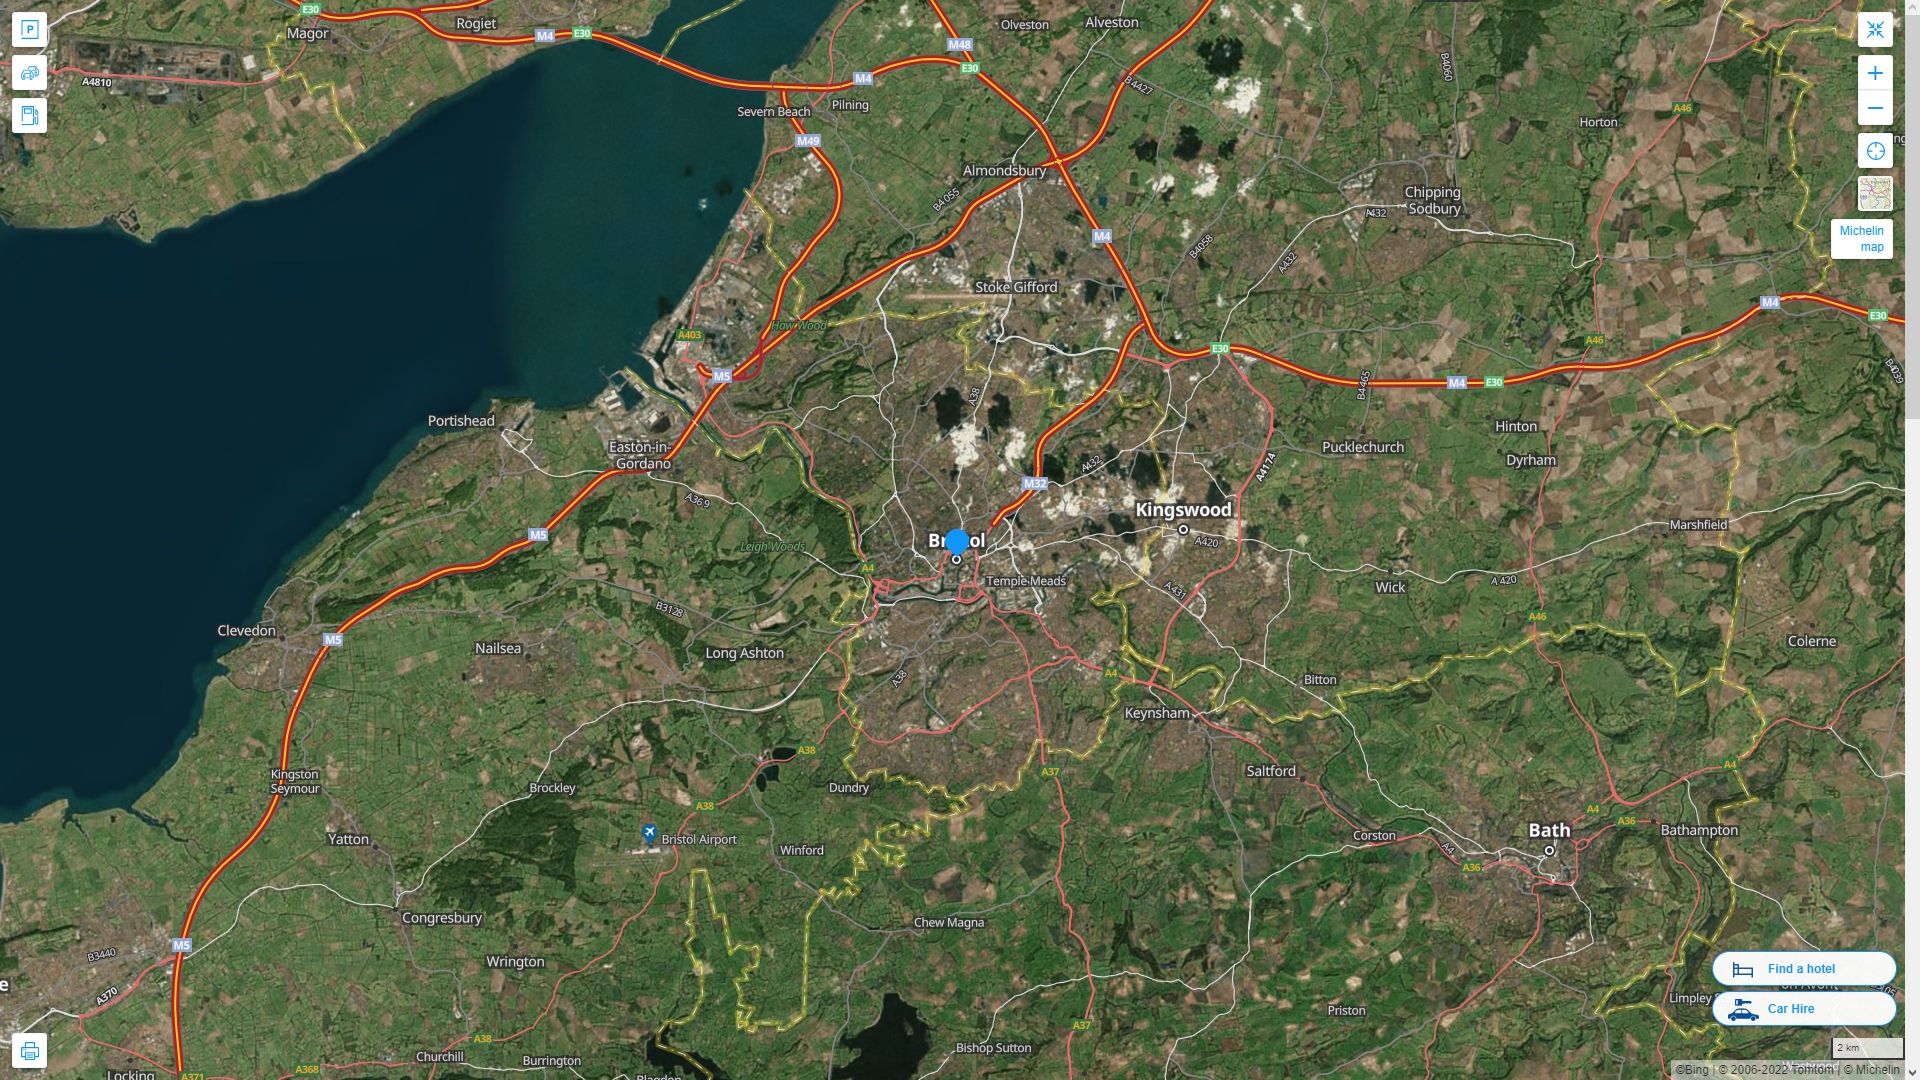 Bristol Highway and Road Map with Satellite View